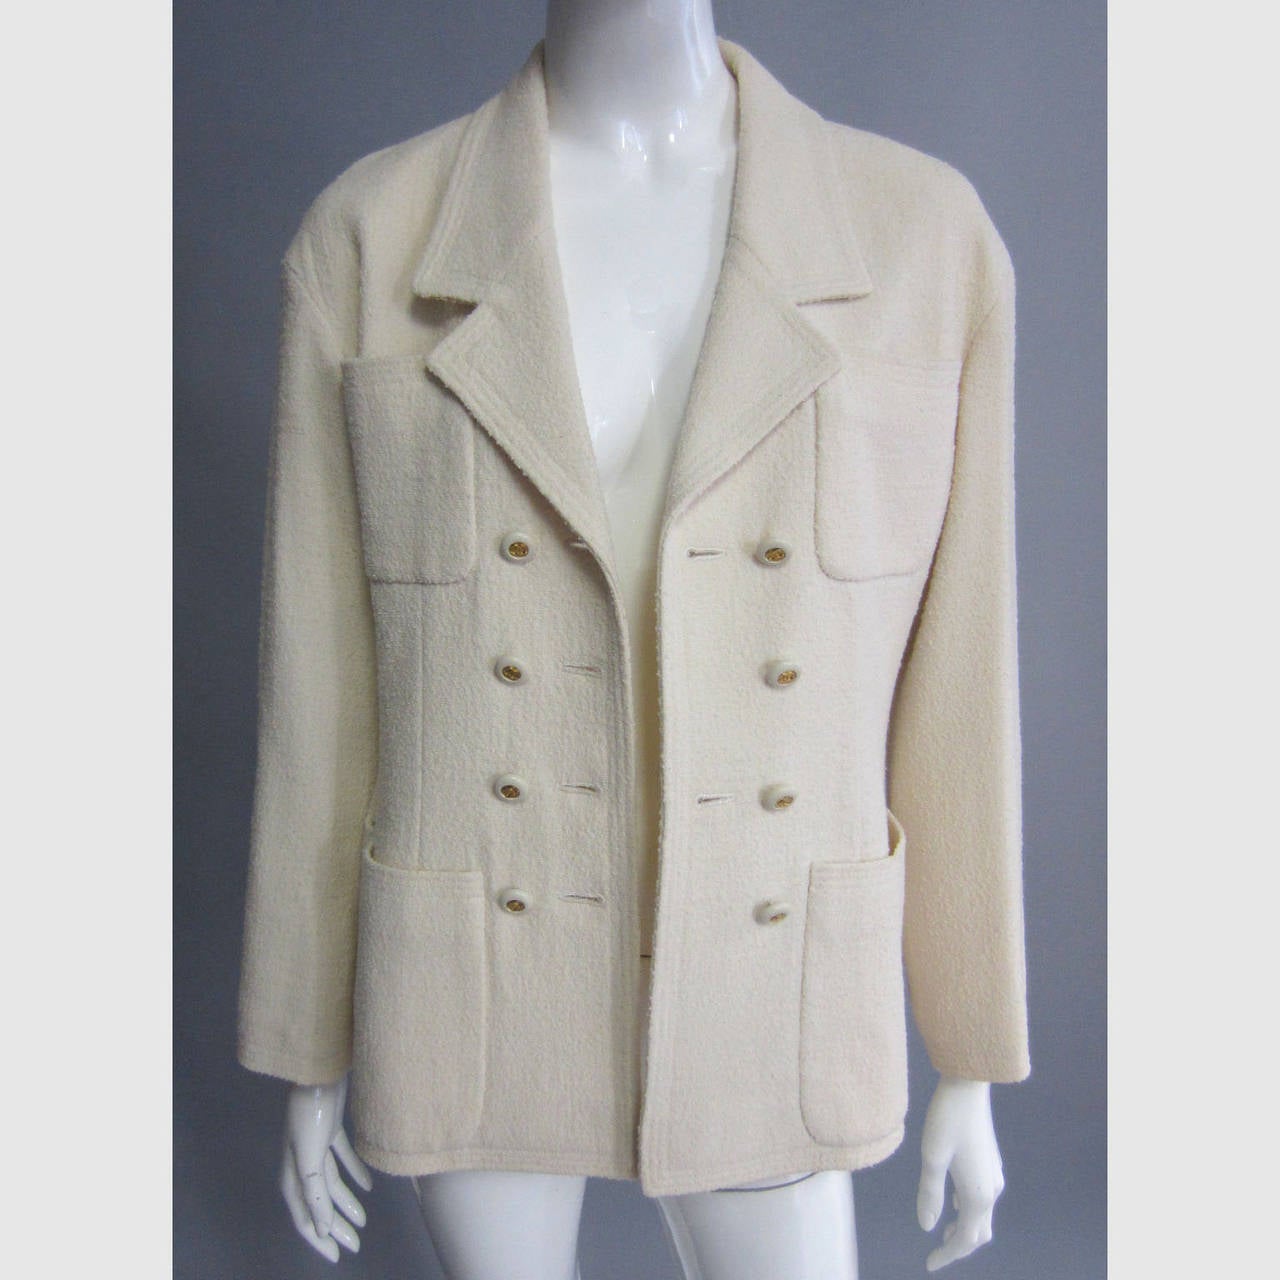 Classic CHANEL, this creme wool jacket features a double row of pockets on the front. The double breasted closure features a series of gold, CC logo buttons set in a matching creme. The lignin is silk with a white CC logo print throughout. The